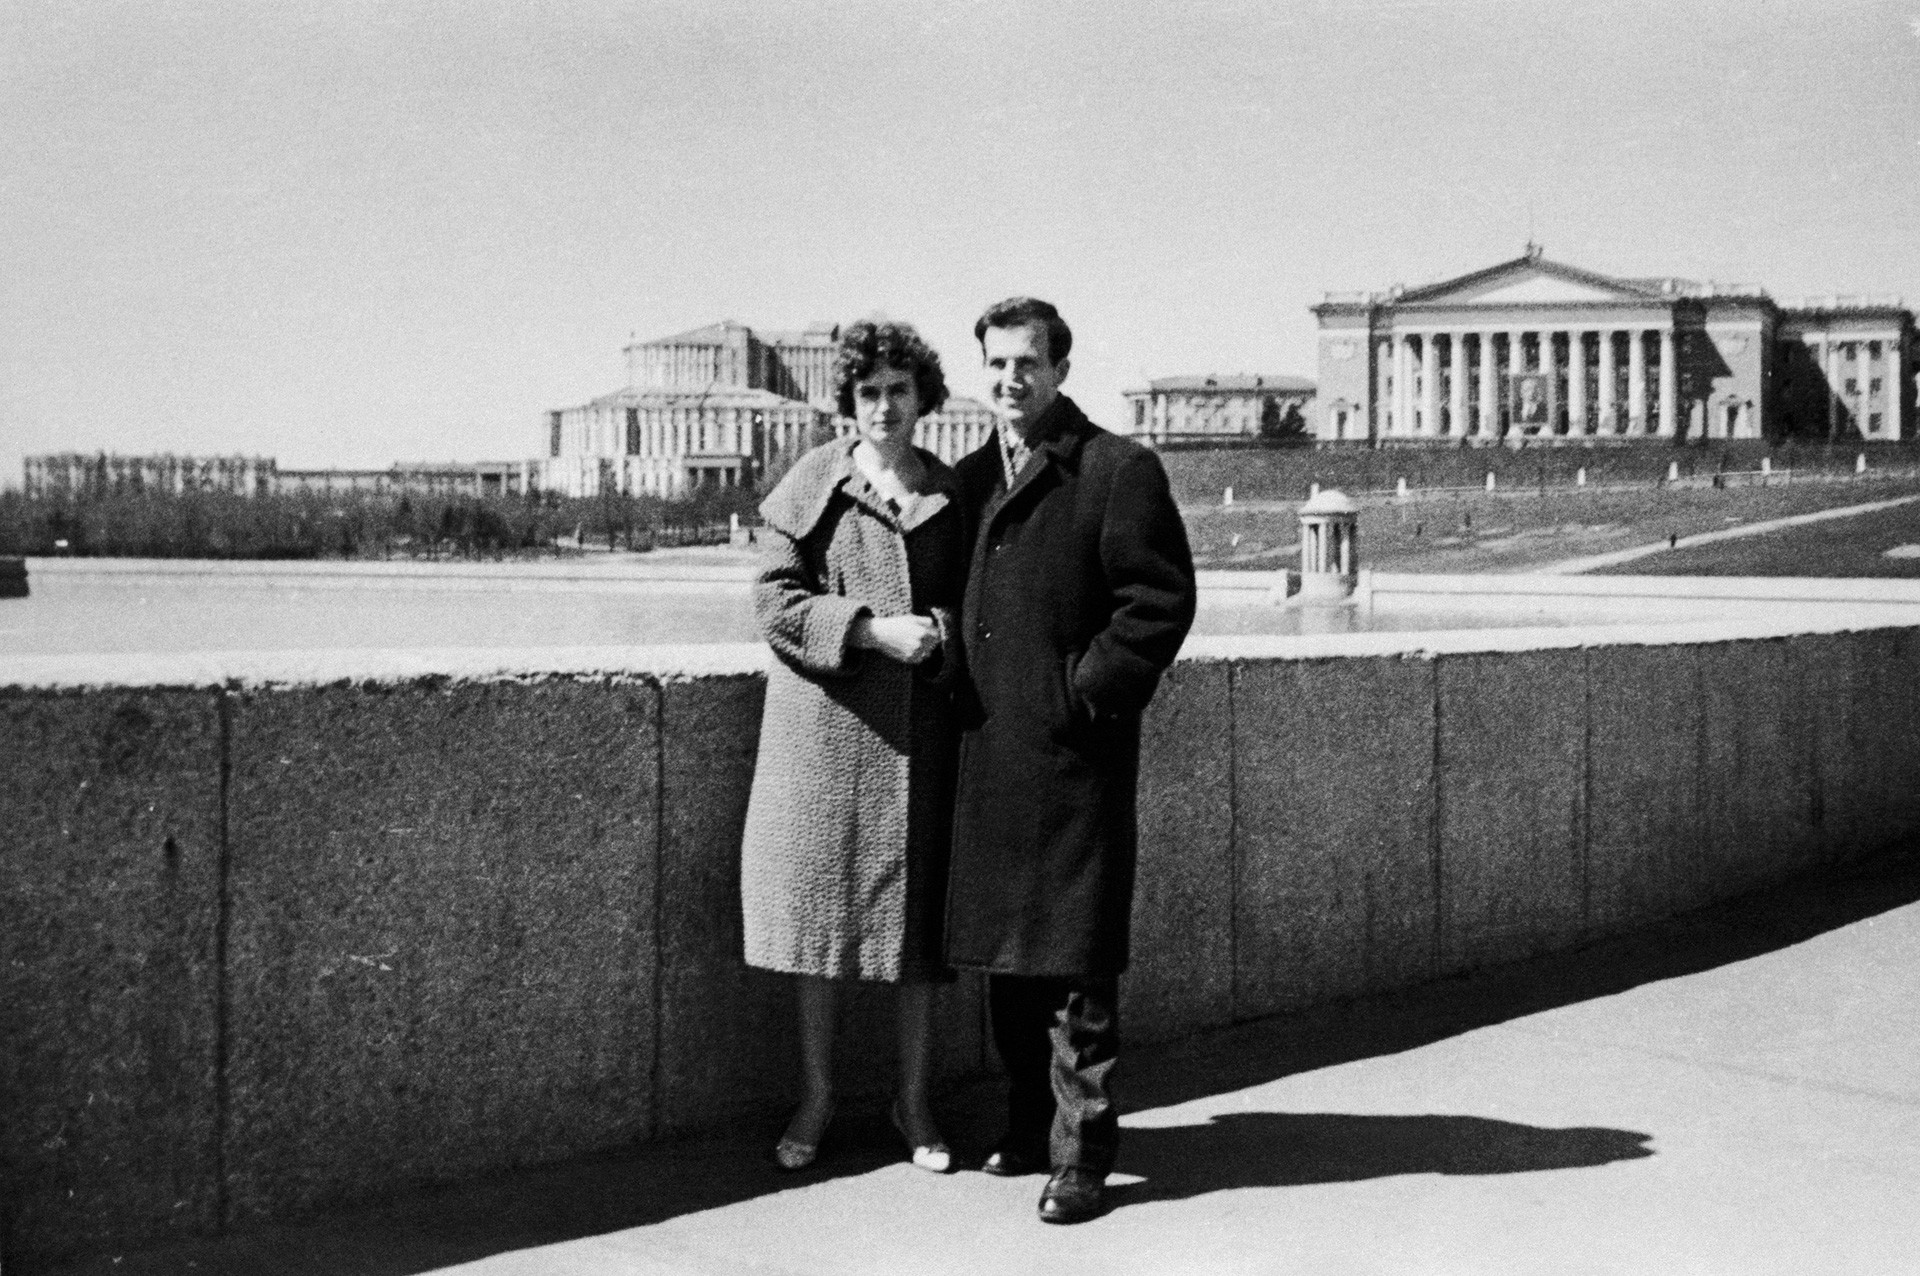 Lee Harvey Oswald and Marina Prusakova (his Soviet-born wife) standing in a park in Minsk, USSR.